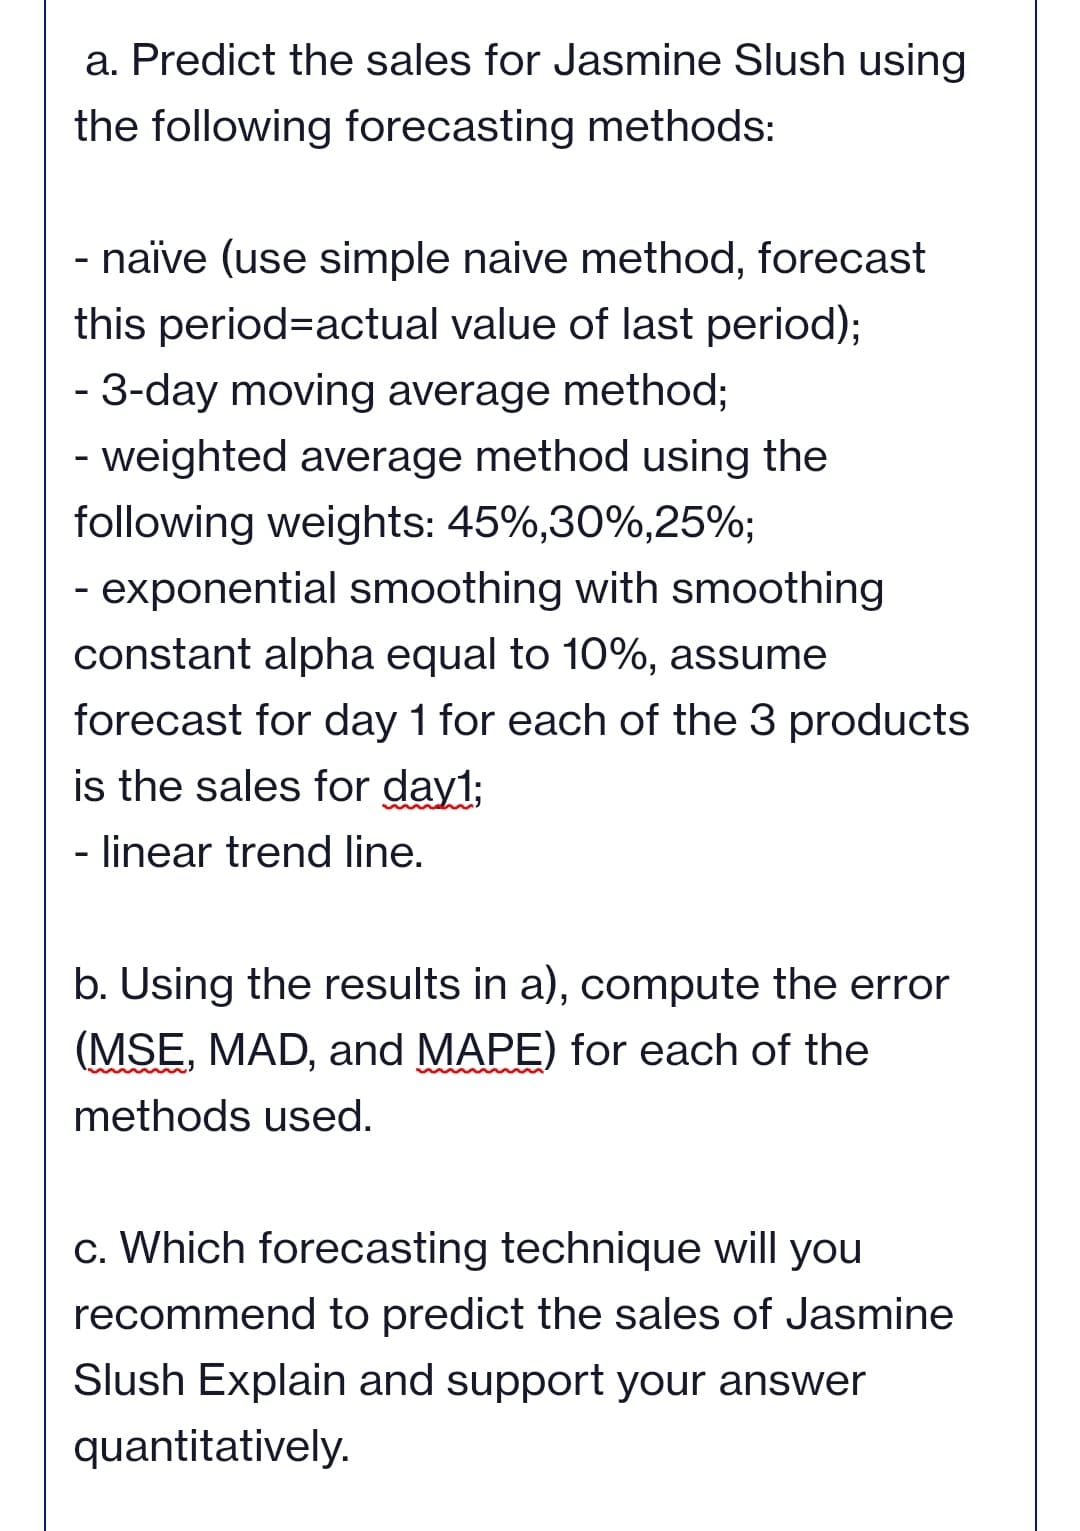 a. Predict the sales for Jasmine Slush using
the following forecasting methods:
- naïve (use simple naive method, forecast
this period=actual value of last period);
- 3-day moving average method;
- weighted average method using the
following weights: 45%,30%,25%;
- exponential smoothing with smoothing
constant alpha equal to 10%, assume
forecast for day 1 for each of the 3 products
is the sales for day1;
- linear trend line.
b. Using the results in a), compute the error
(MSE, MAD, and MAPE) for each of the
methods used.
c. Which forecasting technique will you
recommend to predict the sales of Jasmine
Slush Explain and support your answer
quantitatively.
